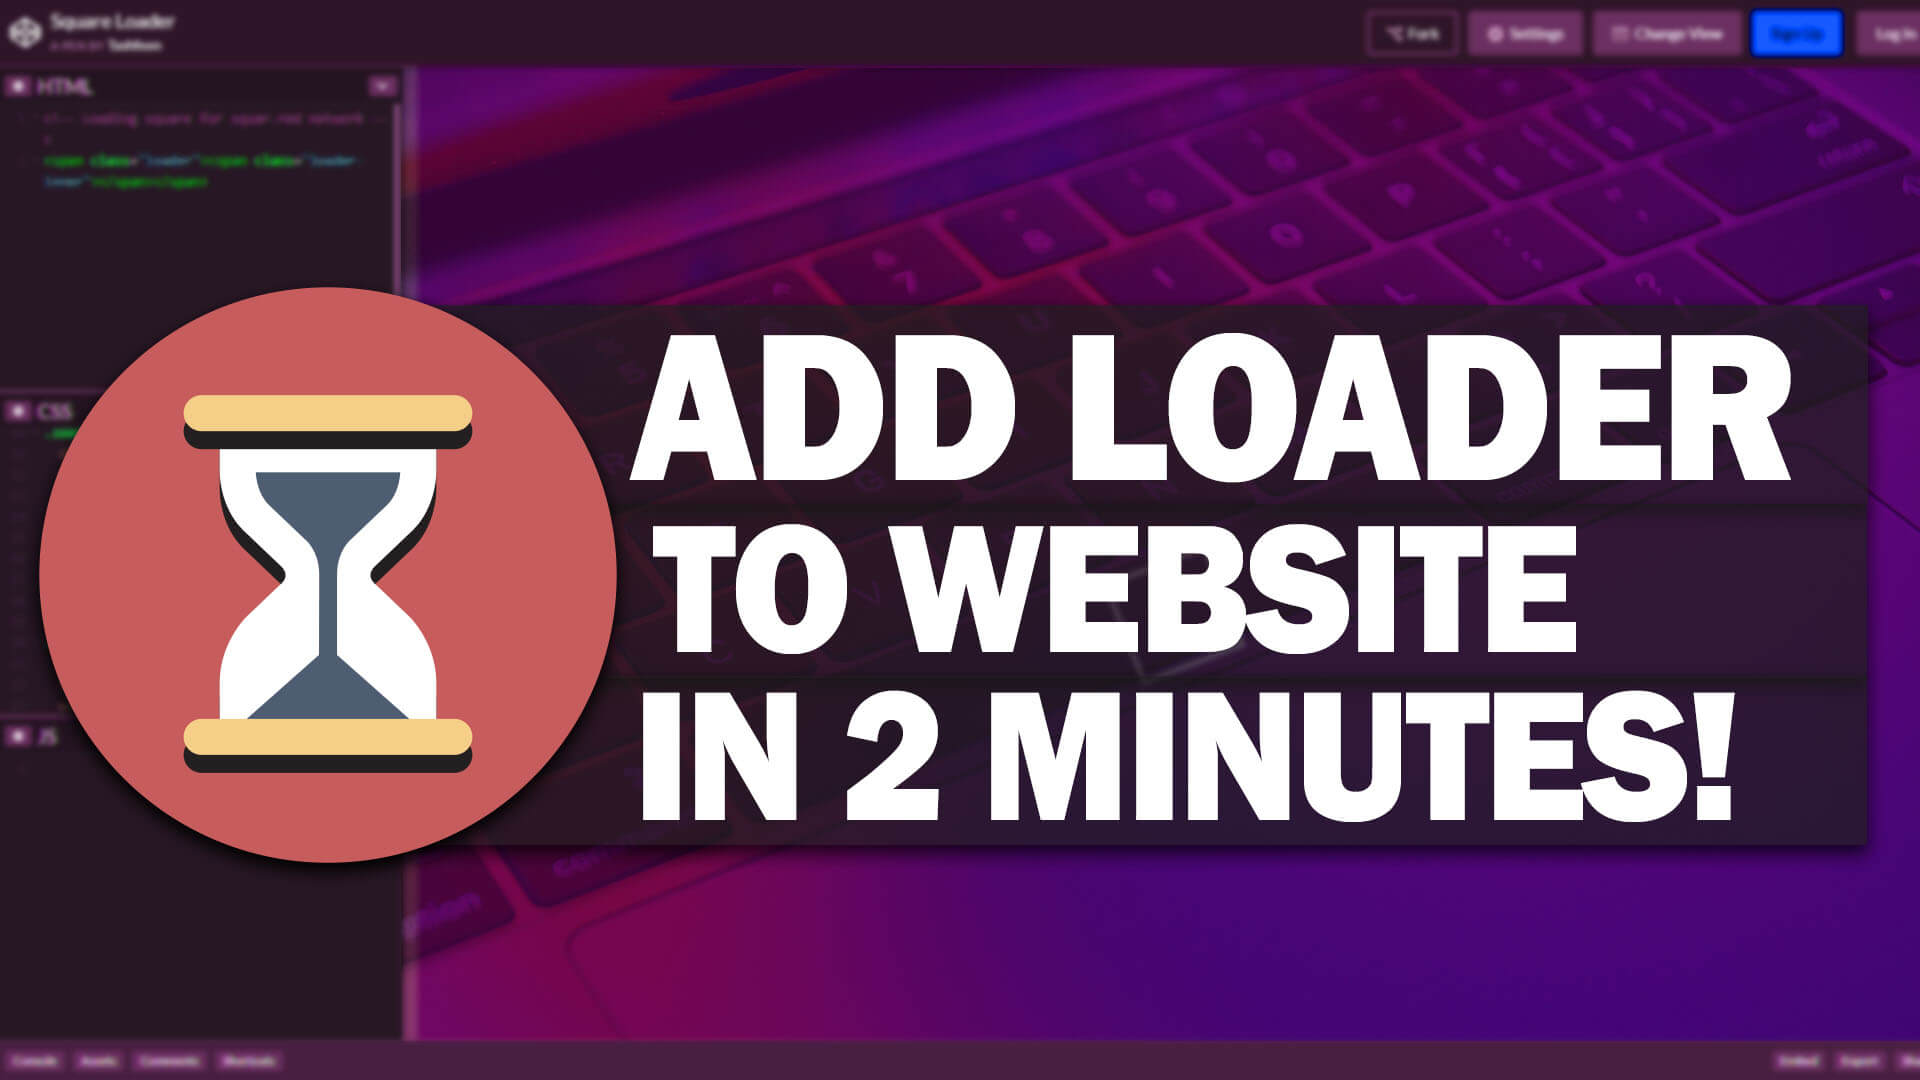 How to Add Loading Animation to Website in 2 Minutes - Red Stapler